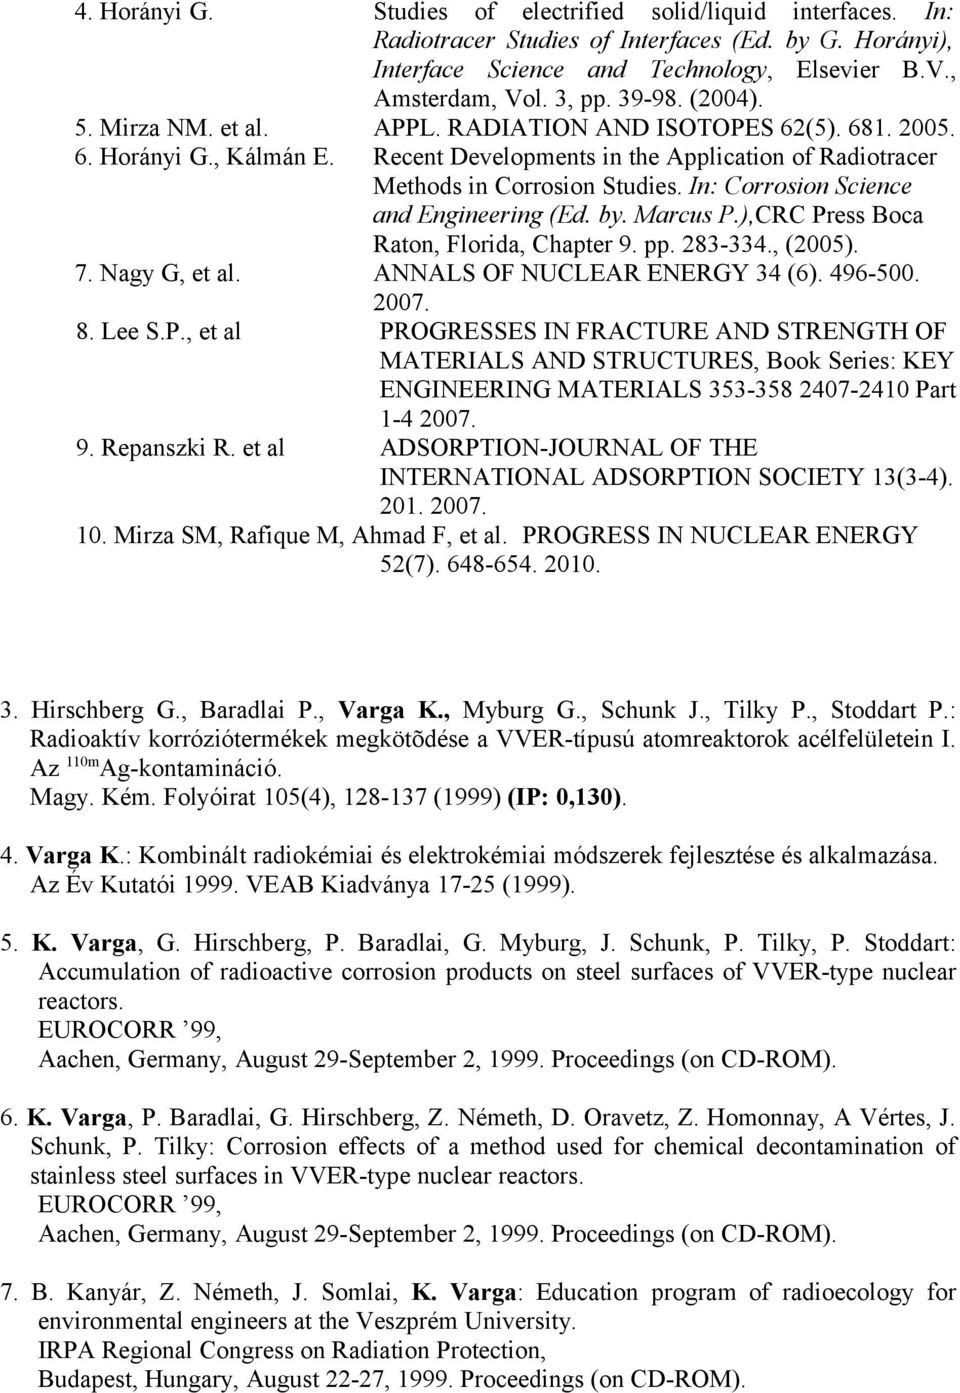 In: Corrosion Science and Engineering (Ed. by. Marcus P.),CRC Press Boca Raton, Florida, Chapter 9. pp. 283-334., (2005). 7. Nagy G, et al. ANNALS OF NUCLEAR ENERGY 34 (6). 496-500. 2007. 8. Lee S.P., et al PROGRESSES IN FRACTURE AND STRENGTH OF MATERIALS AND STRUCTURES, Book Series: KEY ENGINEERING MATERIALS 353-358 2407-2410 Part 1-4 2007.